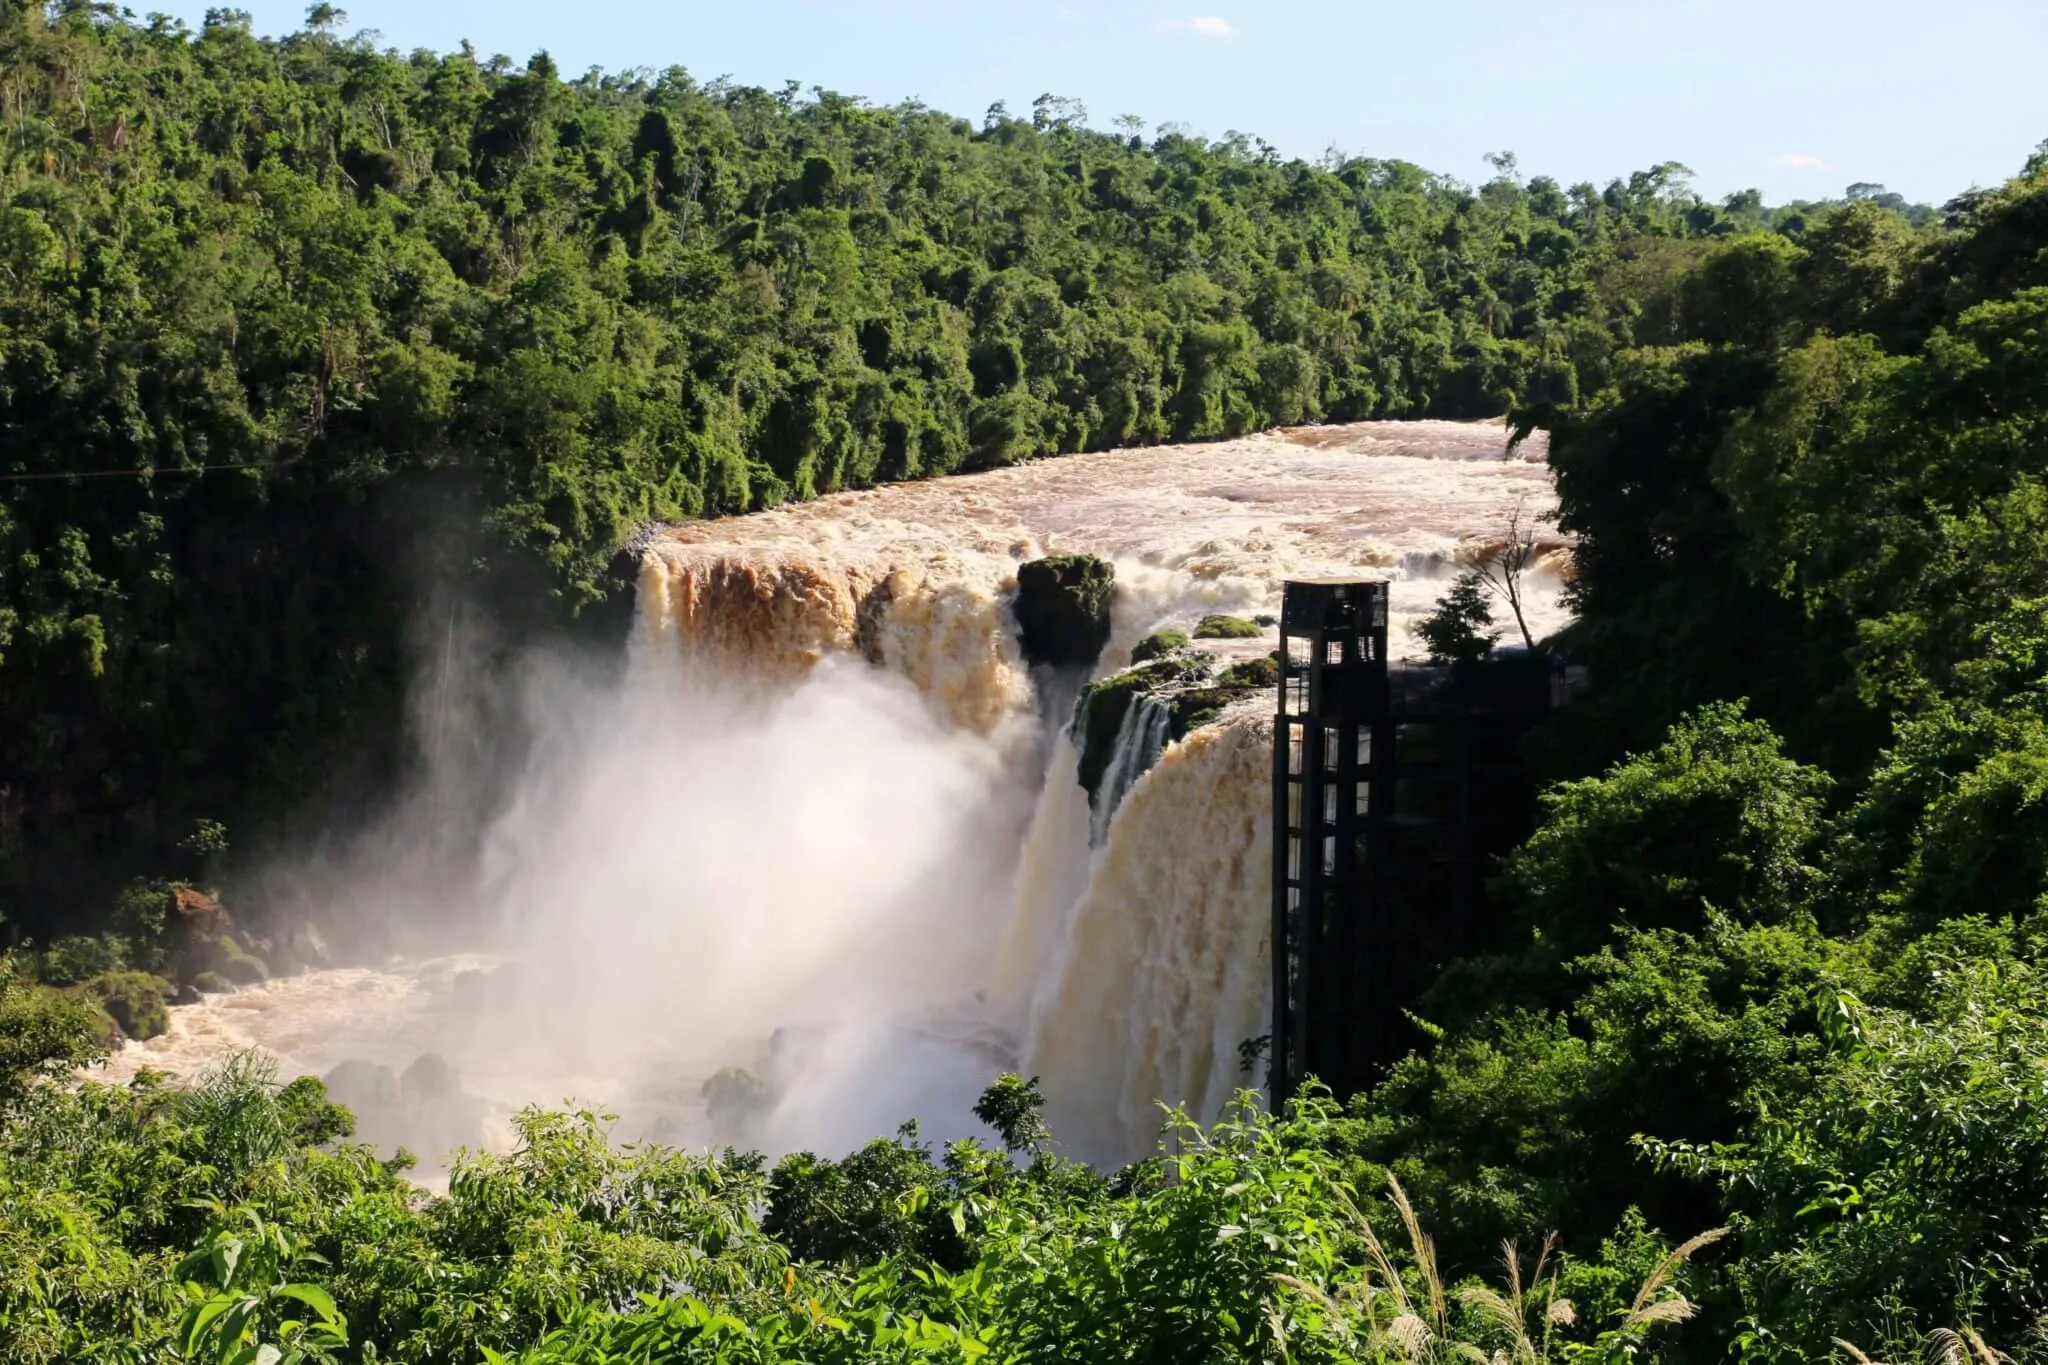 Saltos del Monday in Paraguay, South America | Waterfalls,Parks - Rated 4.1